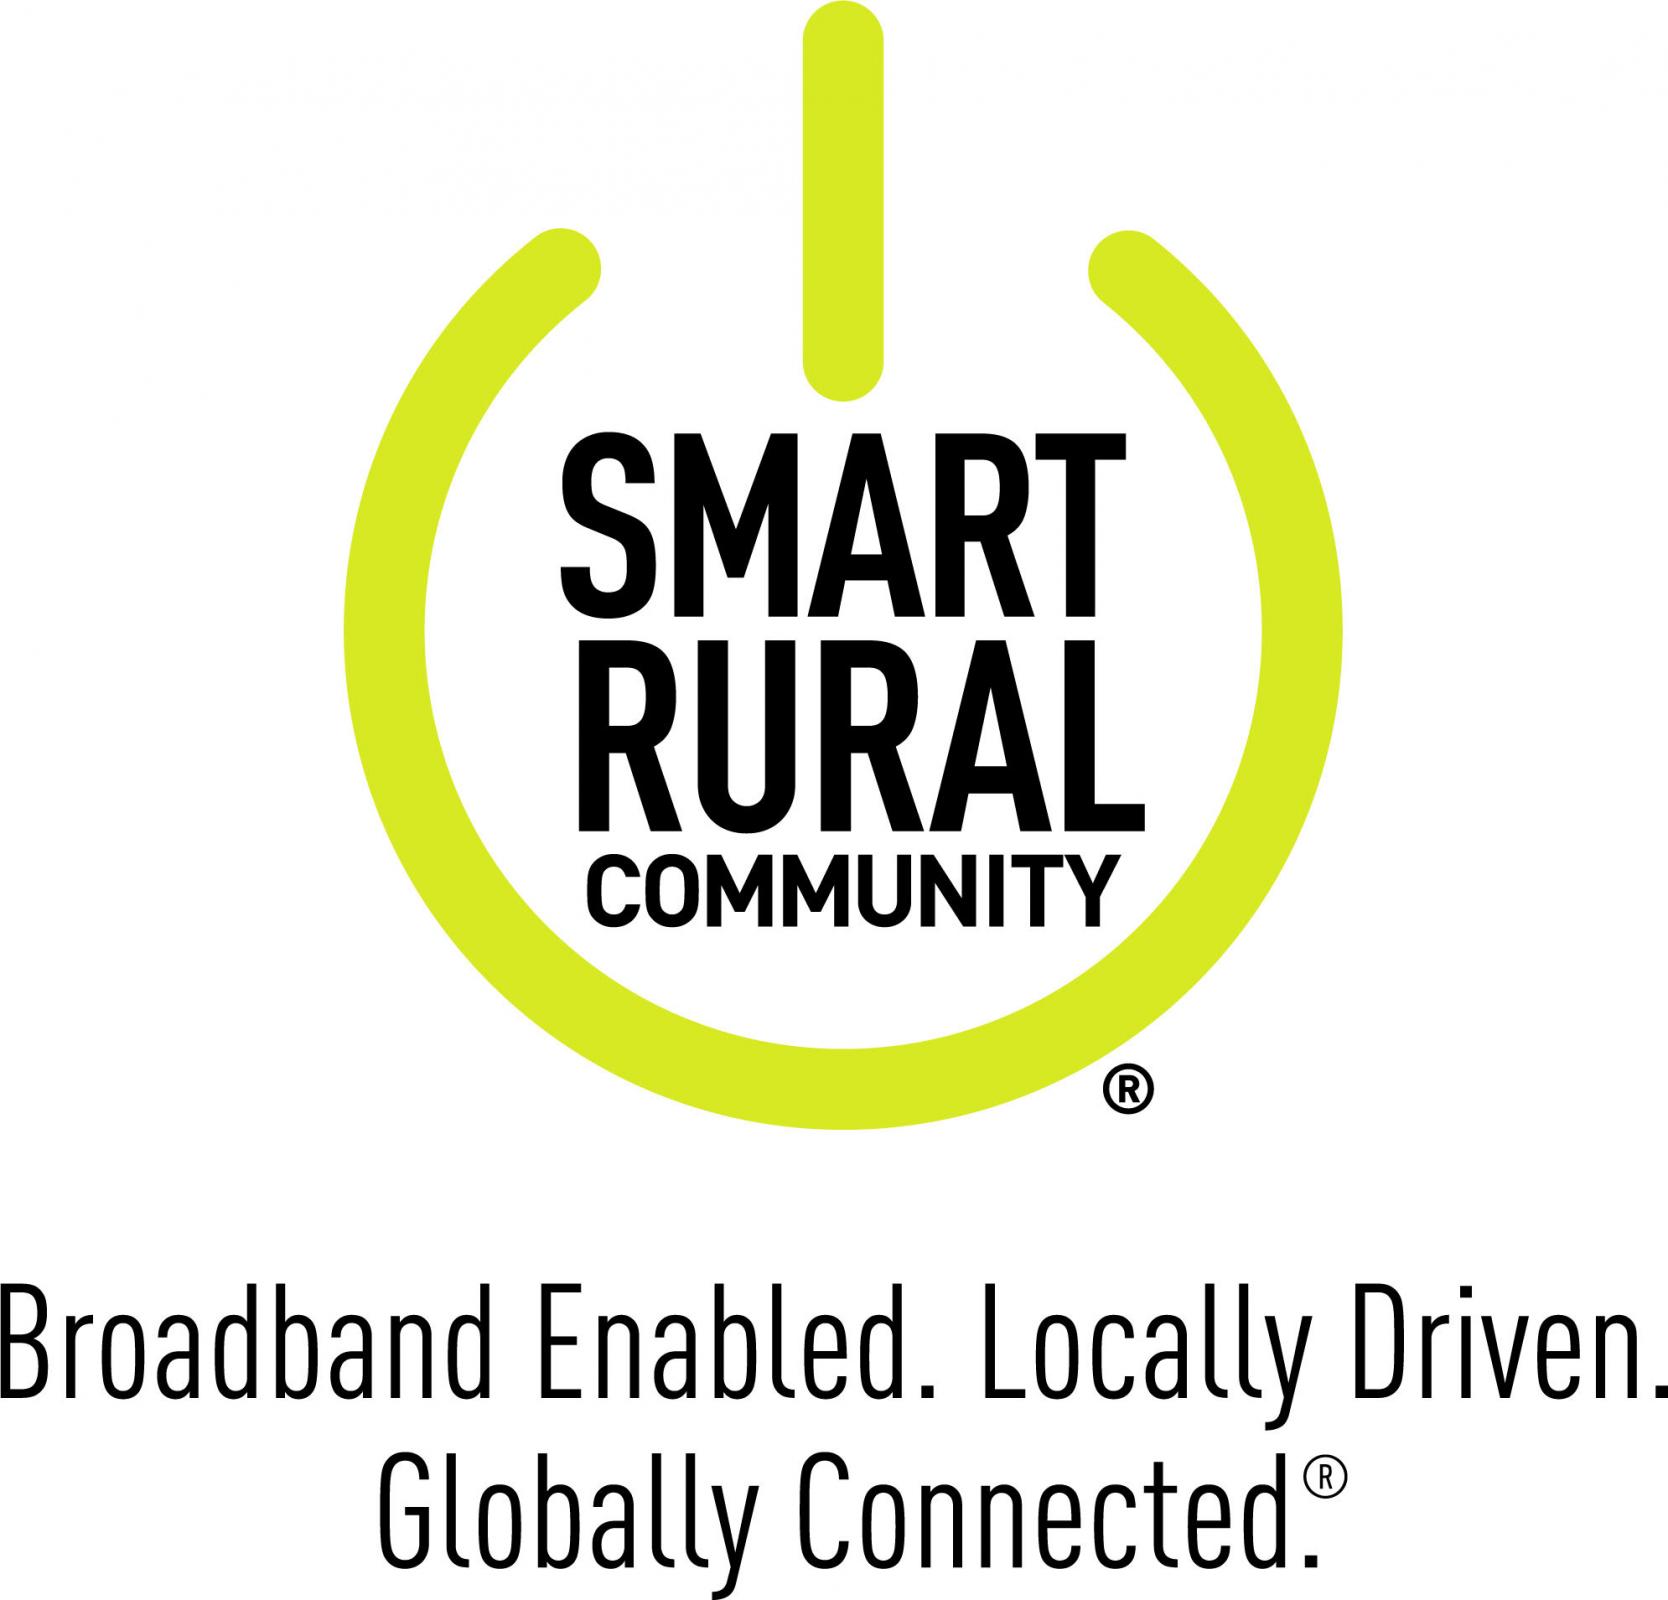 Diller Telephone Celebrates Being Named a “Smart Rural Community” Provider Photo